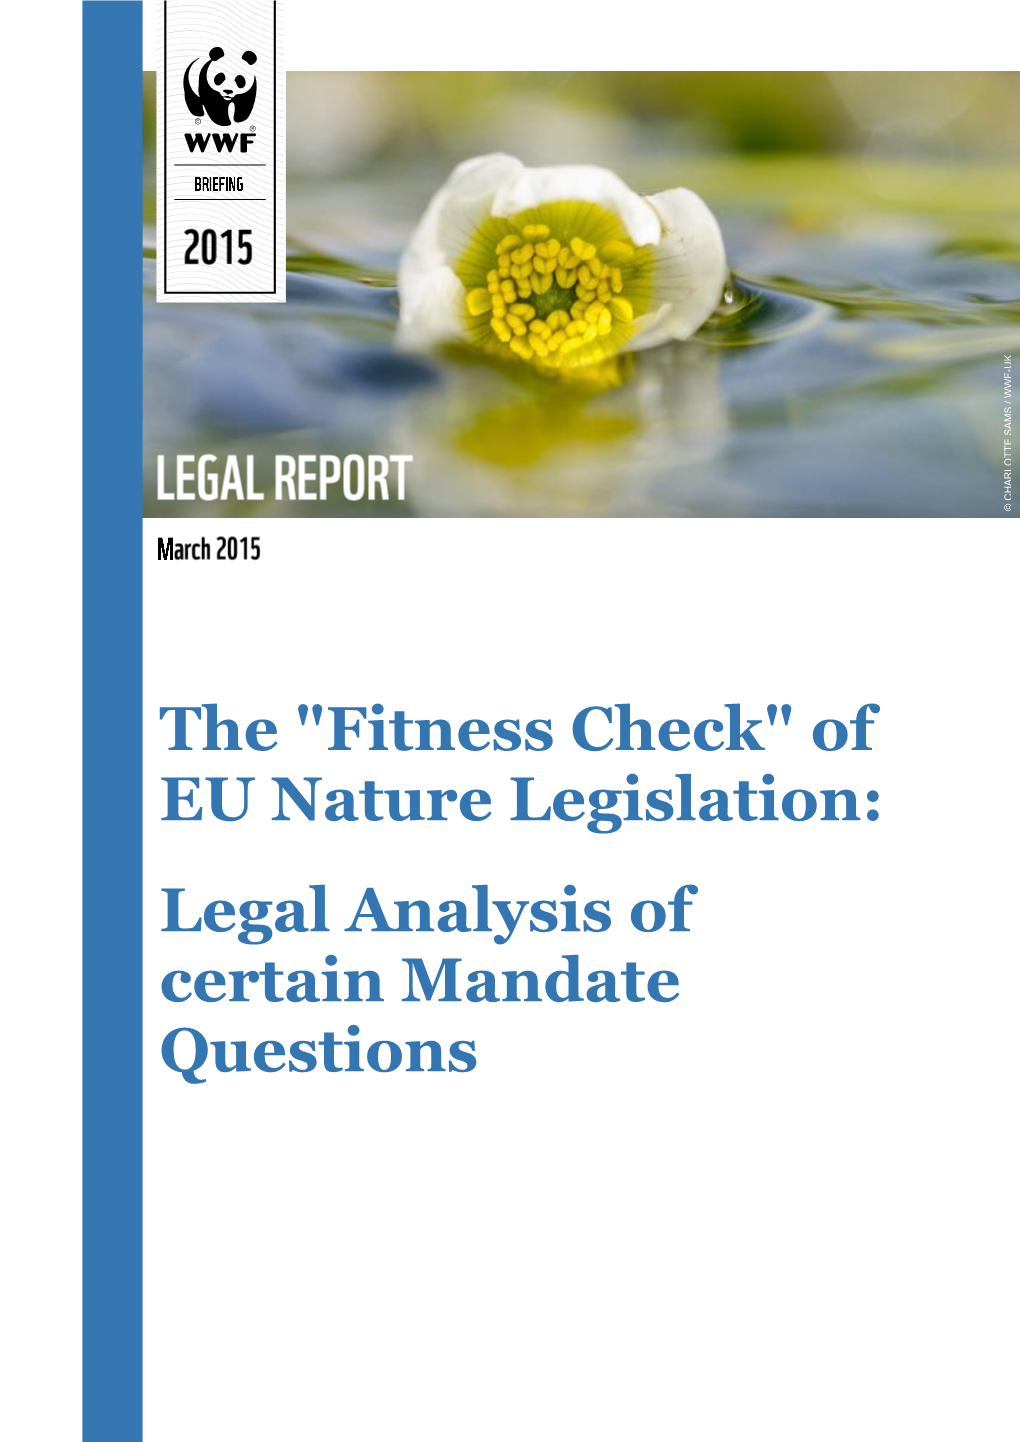 The "Fitness Check" of EU Nature Legislation: Legal Analysis of Certain Mandate Questions